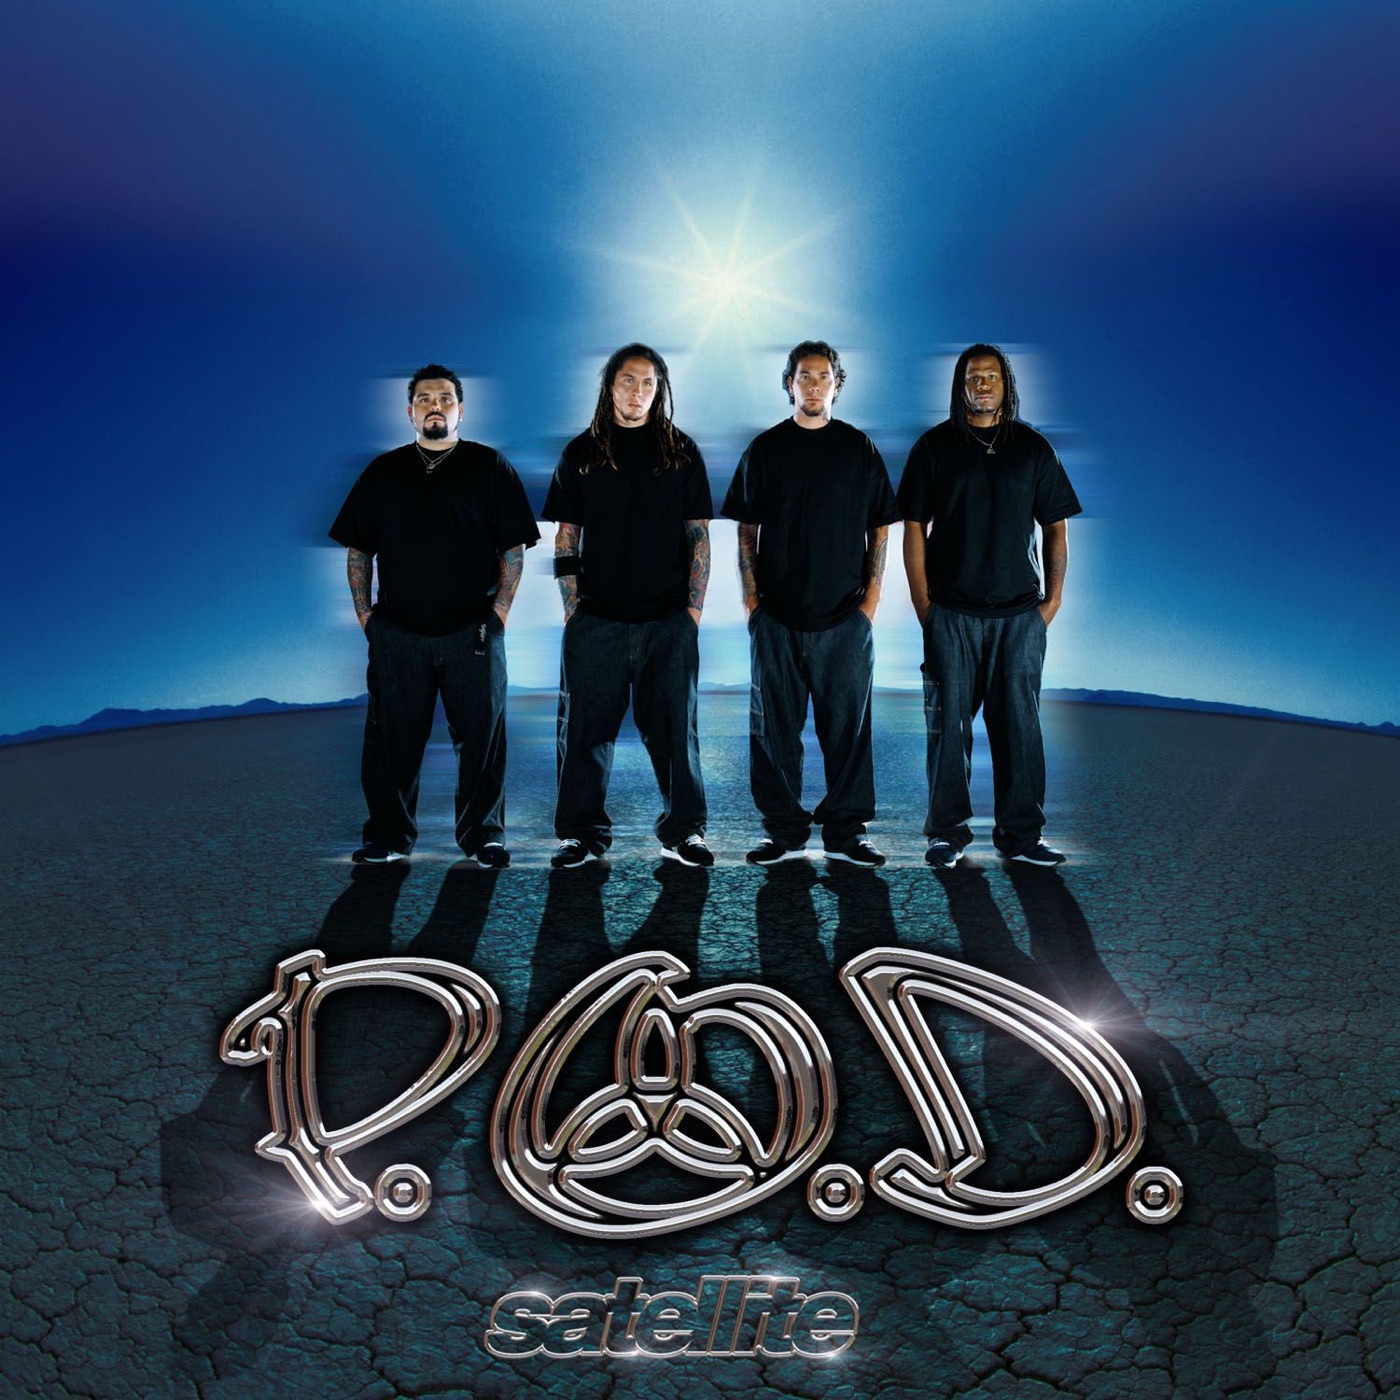 Satellite by P.O.D.